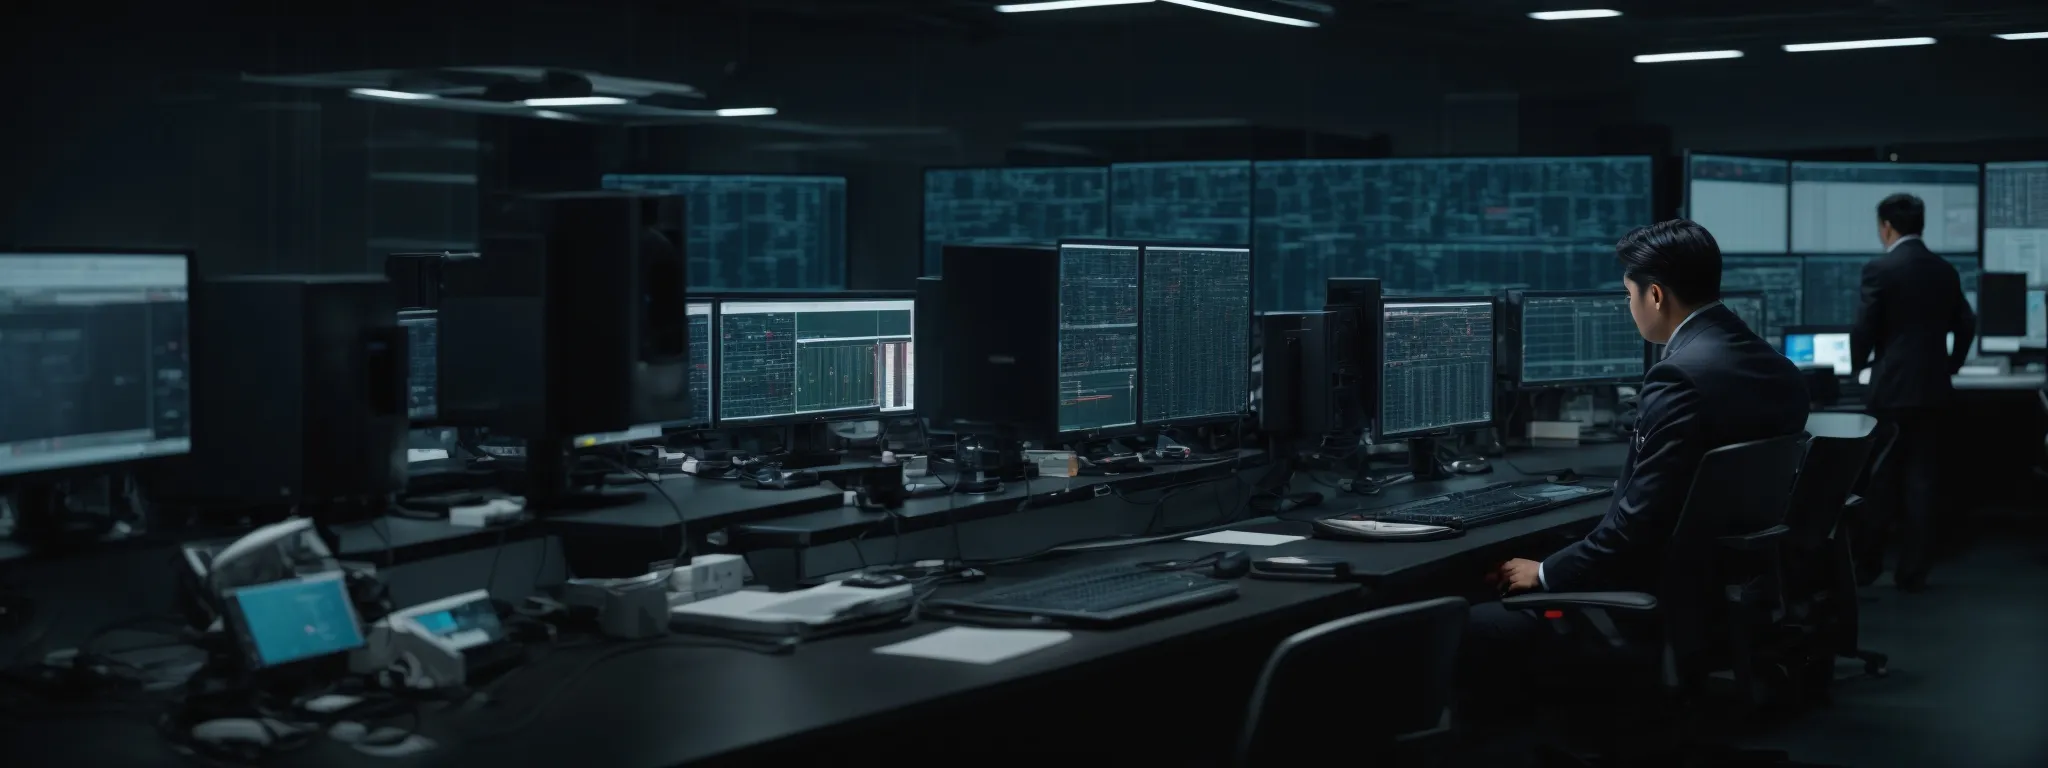 a team of professionals analyzes data on multiple computer screens in a high-tech control room.